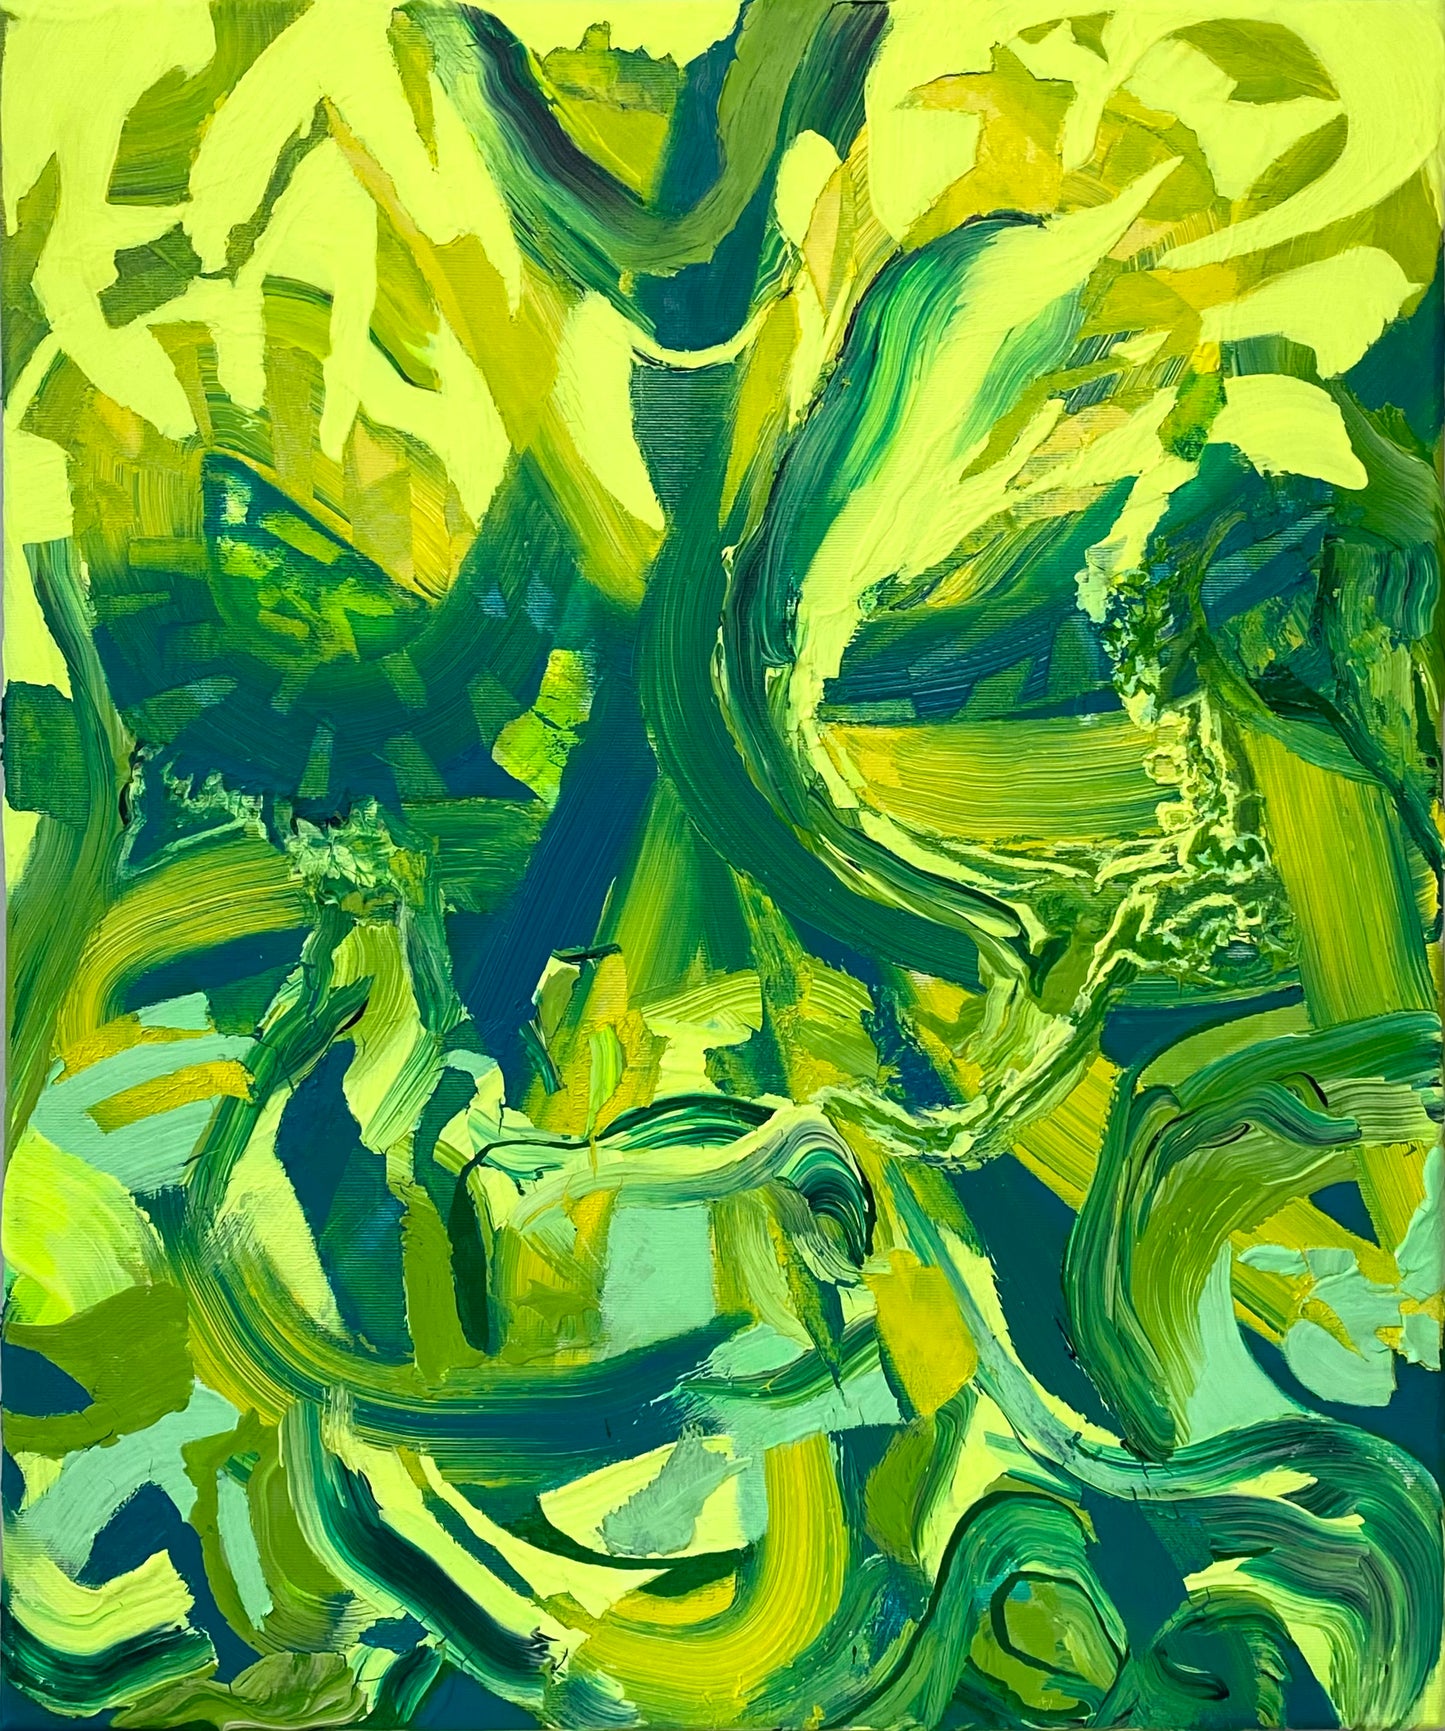 absorbing nature 1 - painting